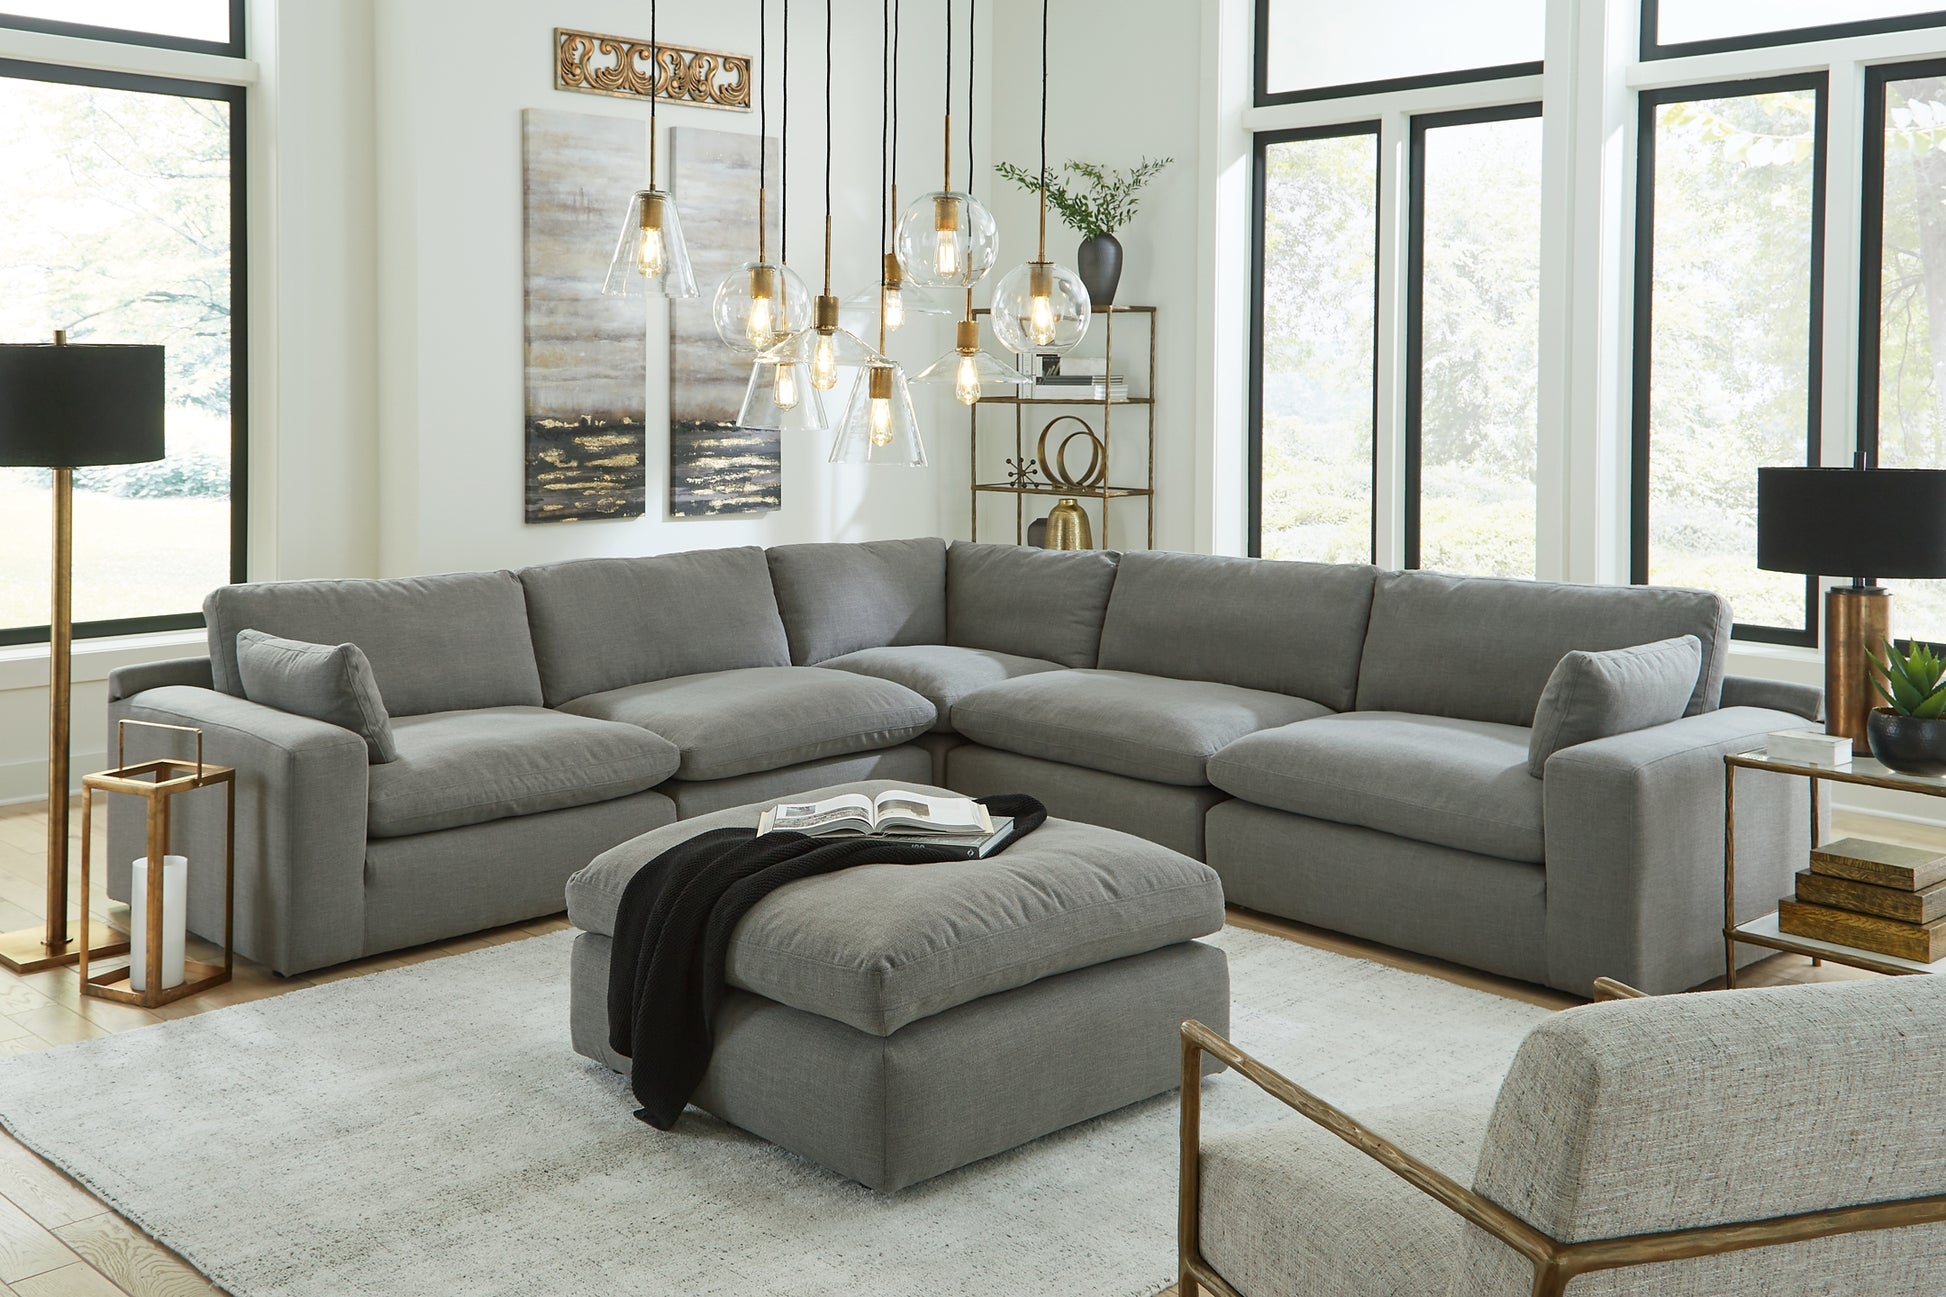 Elyza 5-Piece Sectional with Ottoman Wilson Furniture (OH)  in Bridgeport, Ohio. Serving Bridgeport, Yorkville, Bellaire, & Avondale